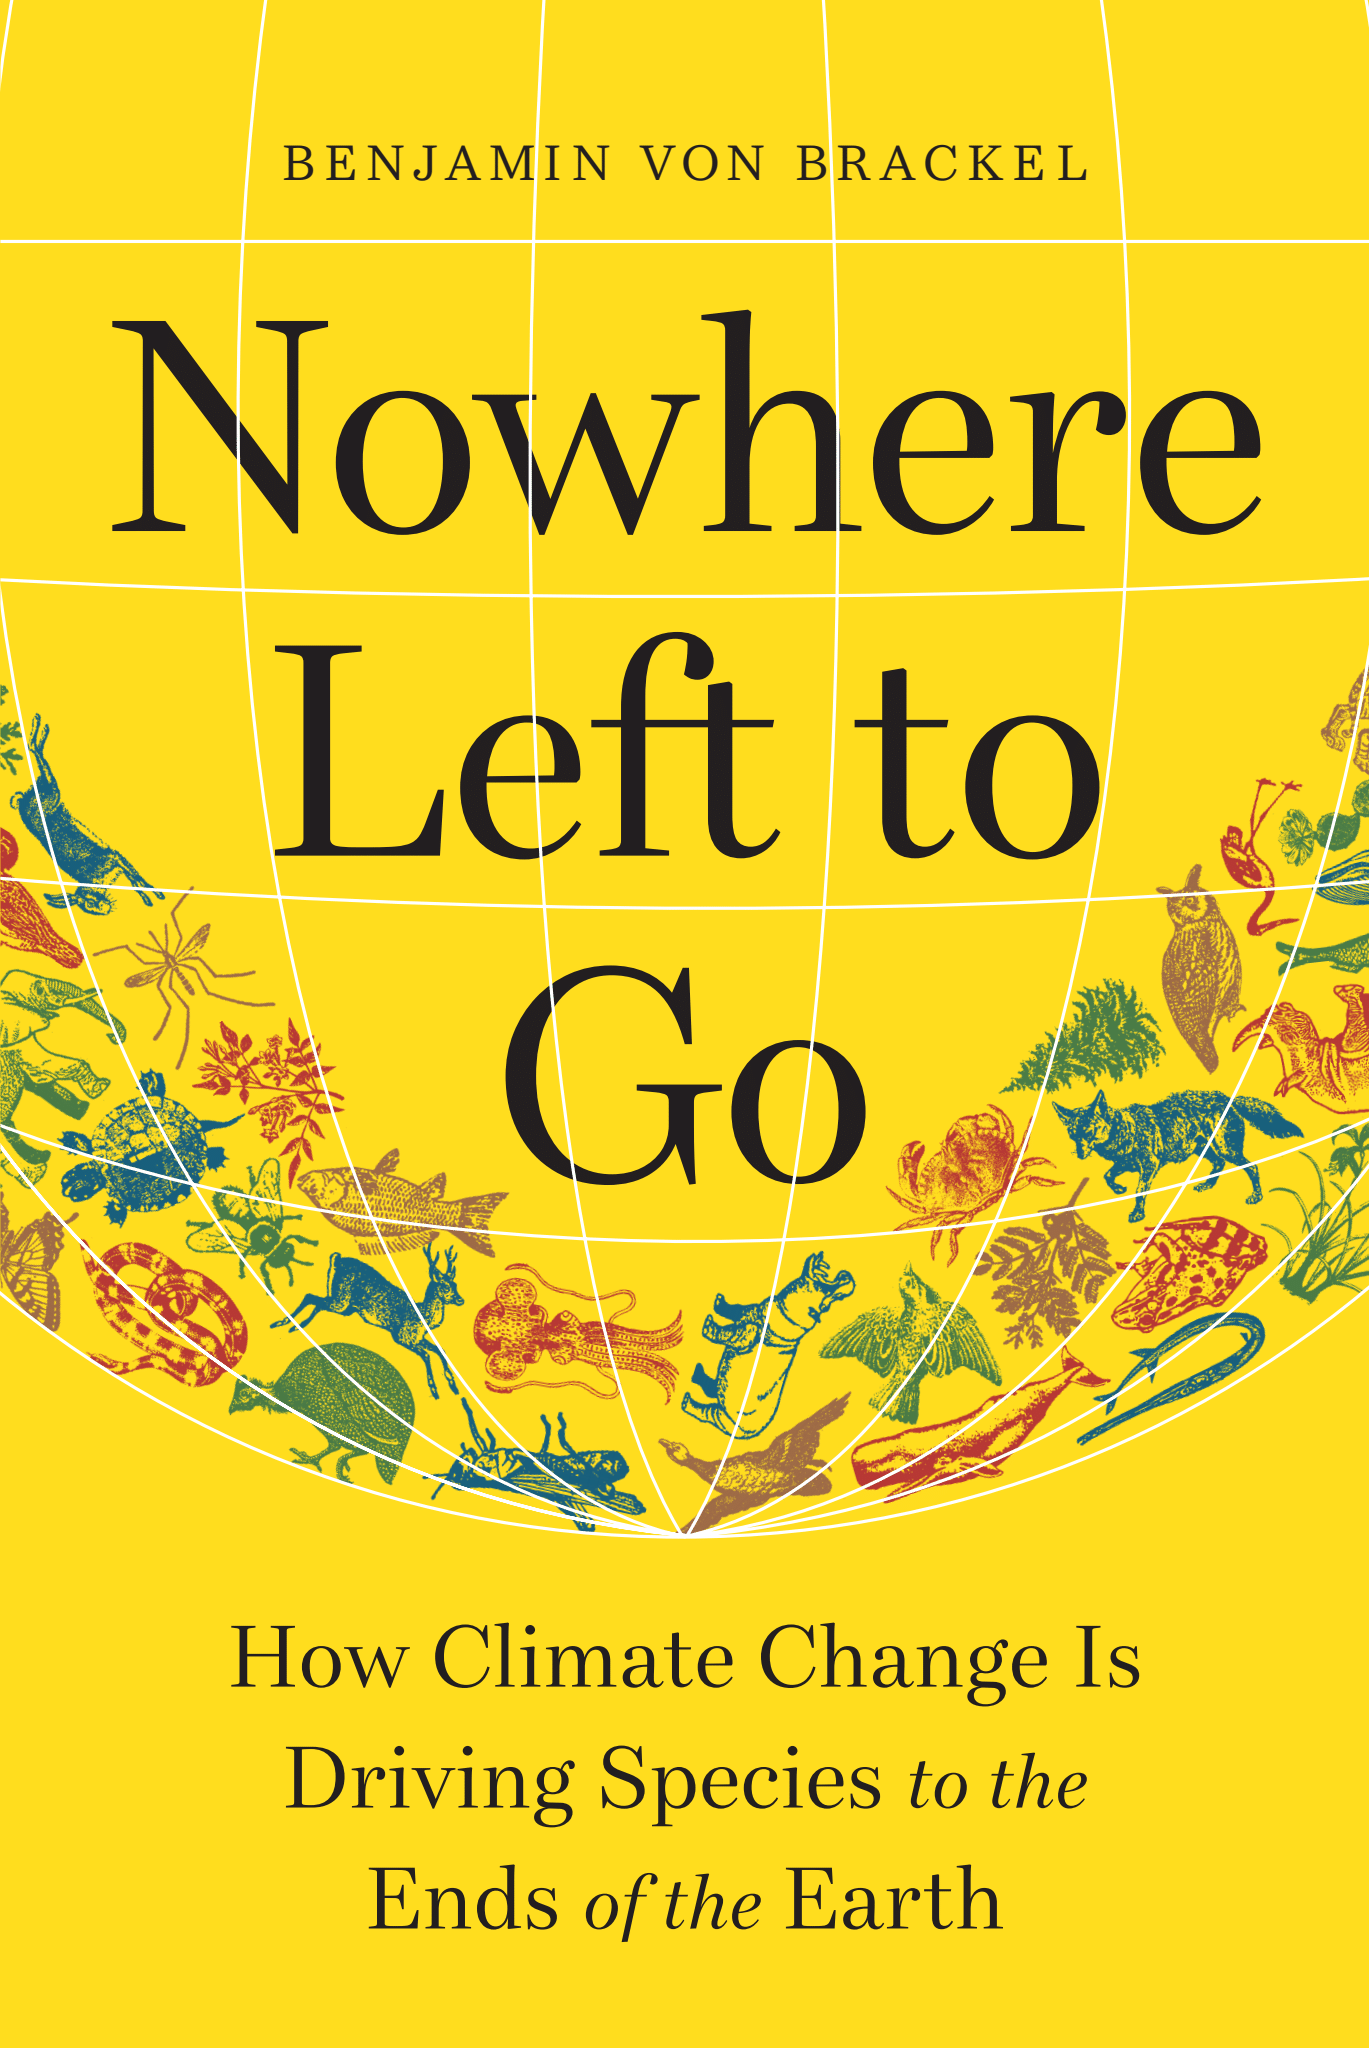 Cover of Nowhere Left to Go.